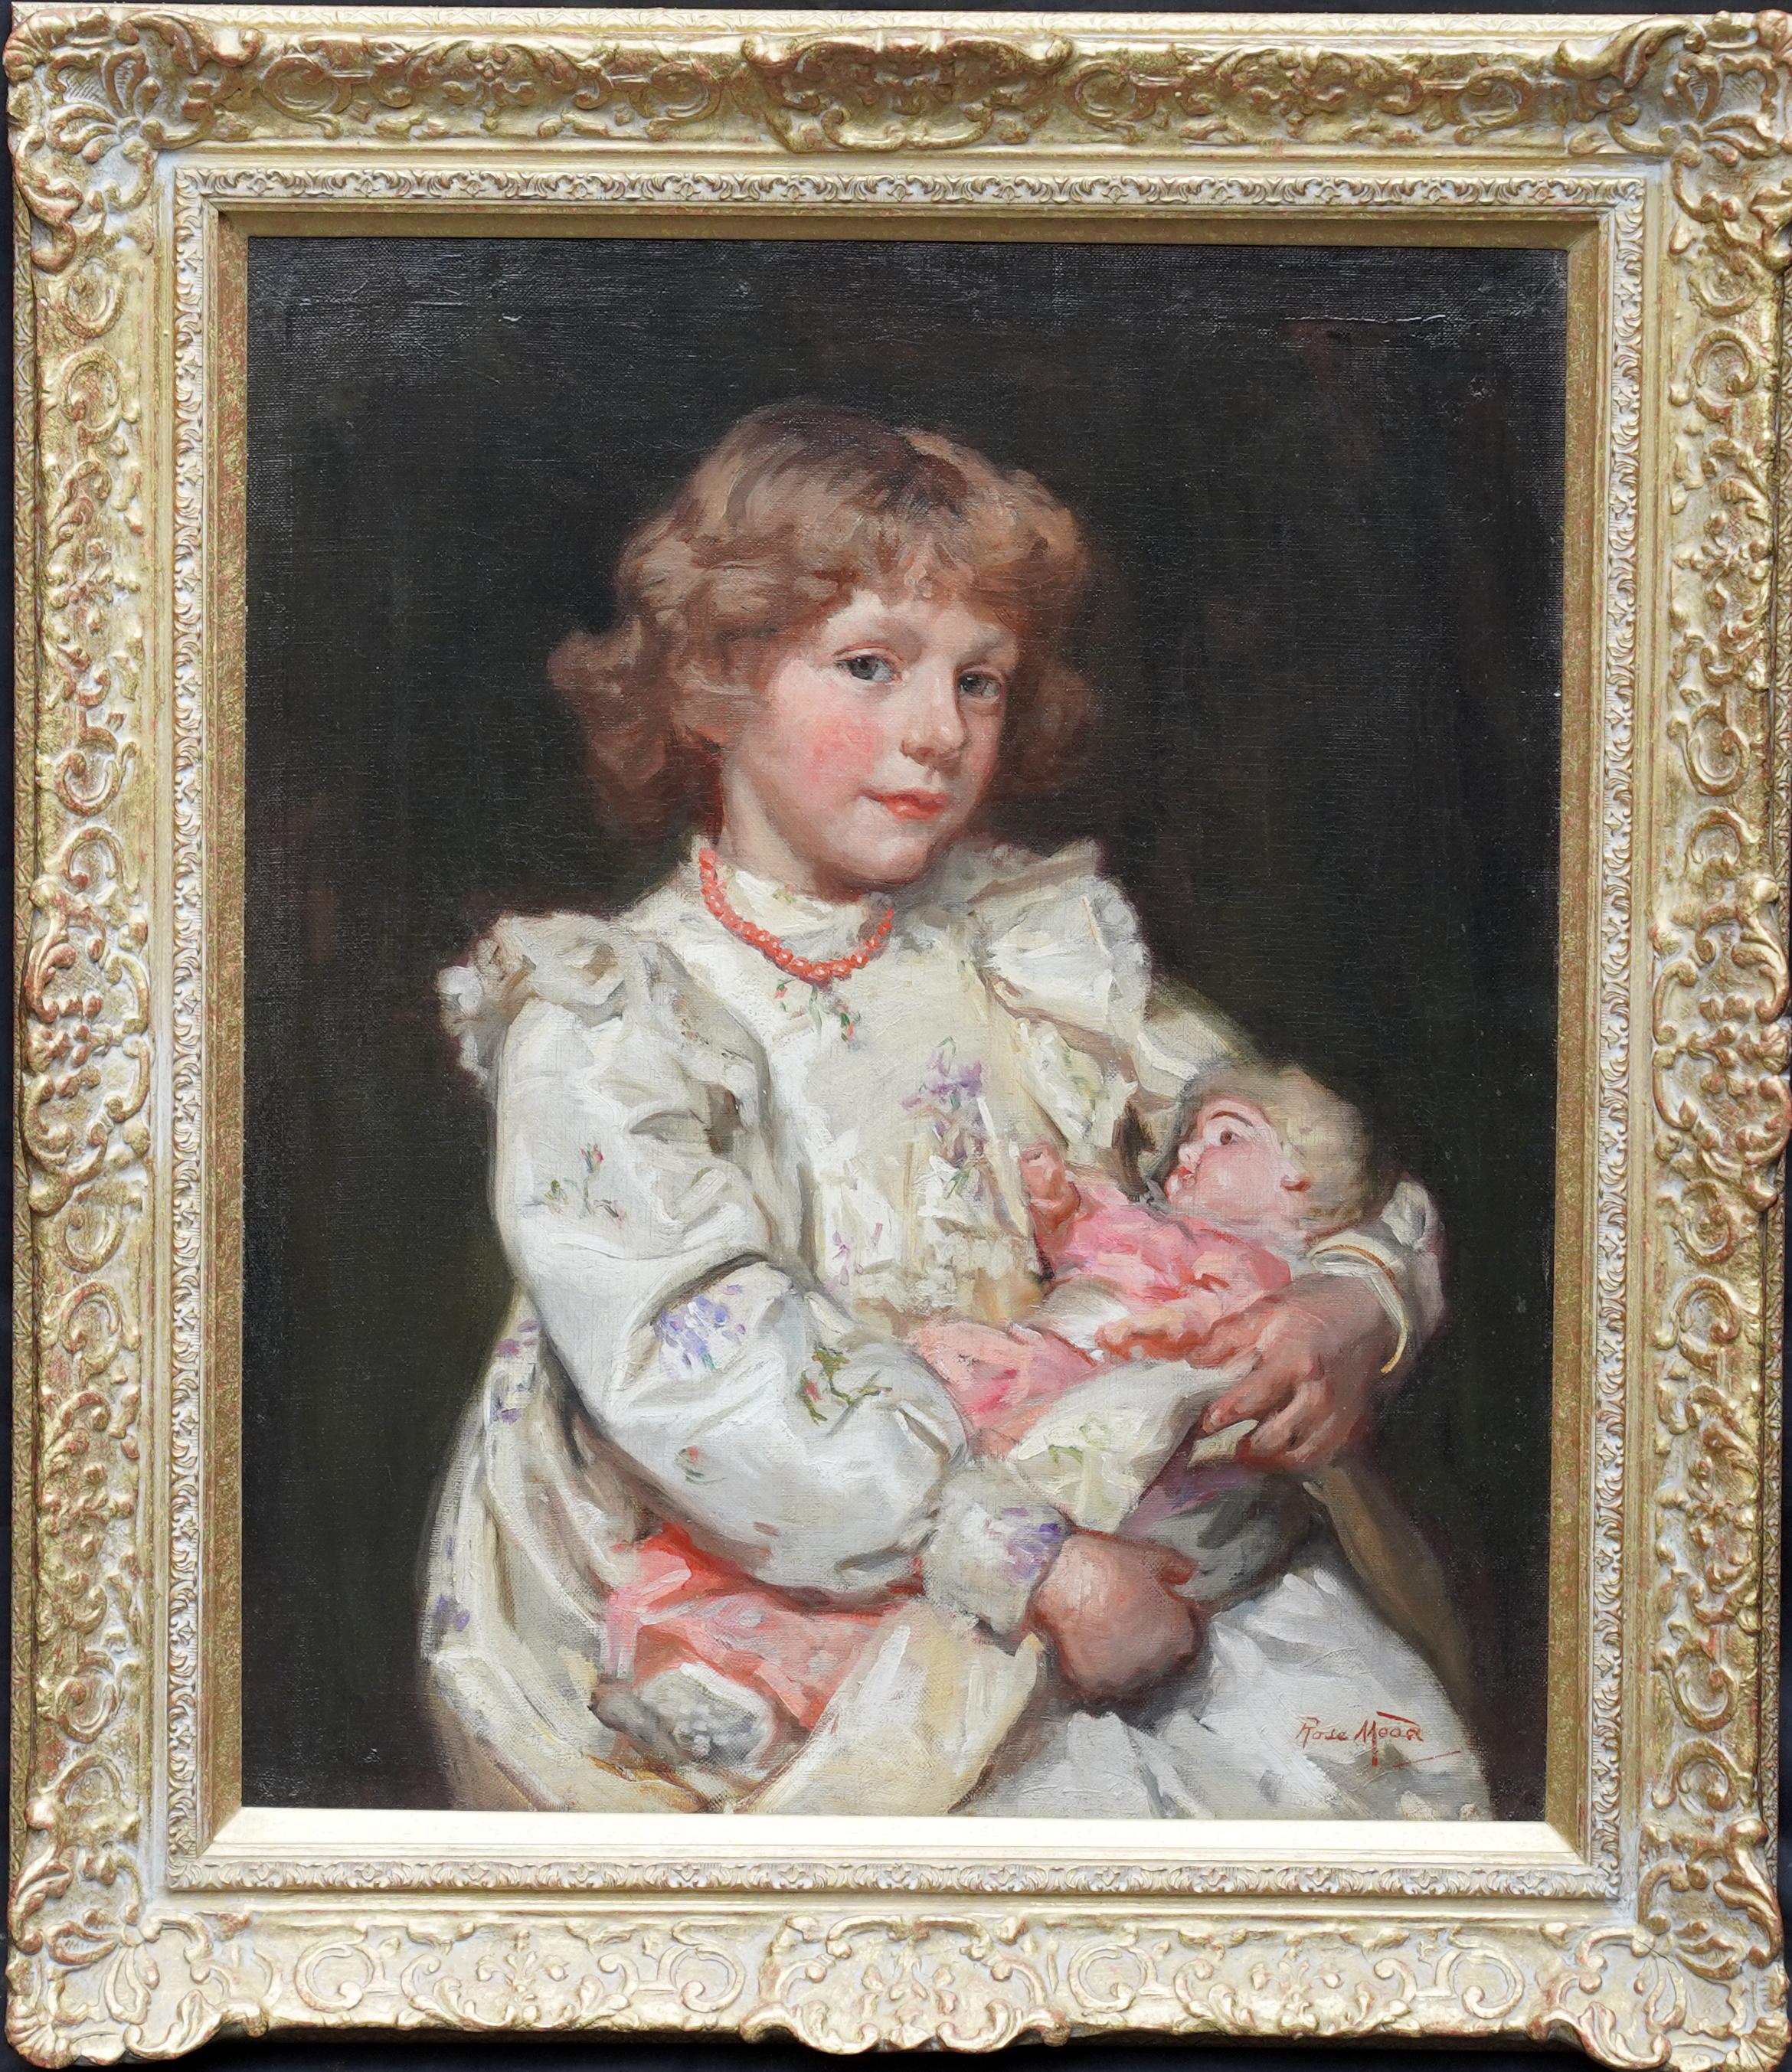 Rose Mead Portrait Painting - Portrait of a Girl with Doll - British Edwardian art portrait oil painting